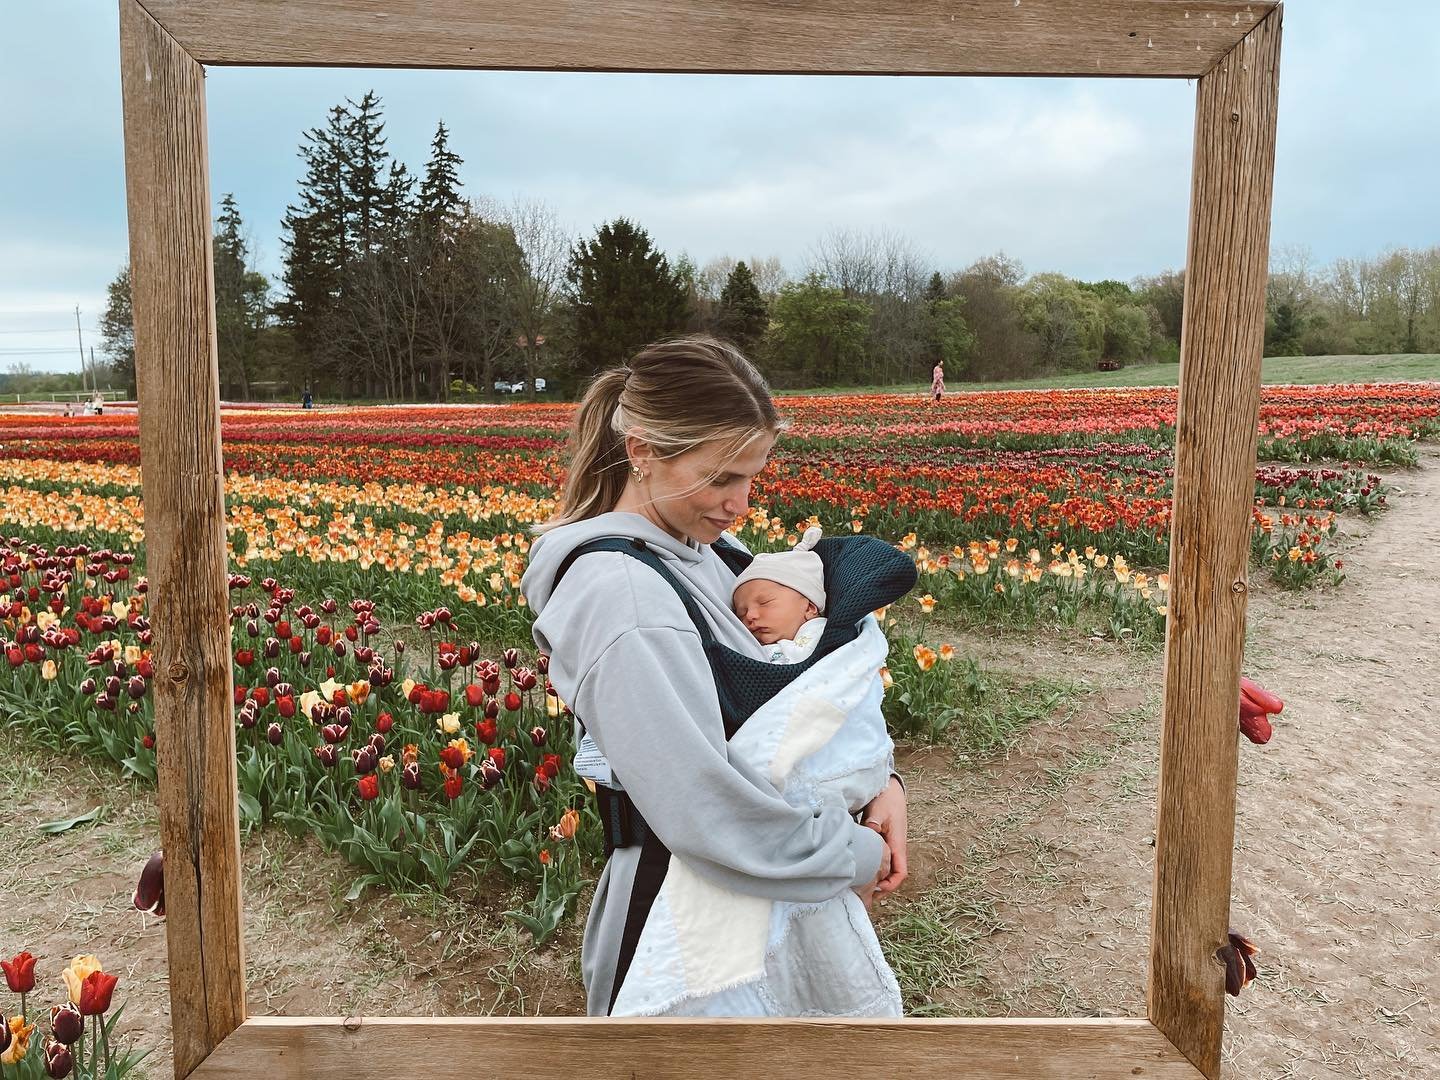 everyone and their mother has this same photo on their feed 🌷 

mac&rsquo;s first fresh air/carrier adventure last week was a beautiful one